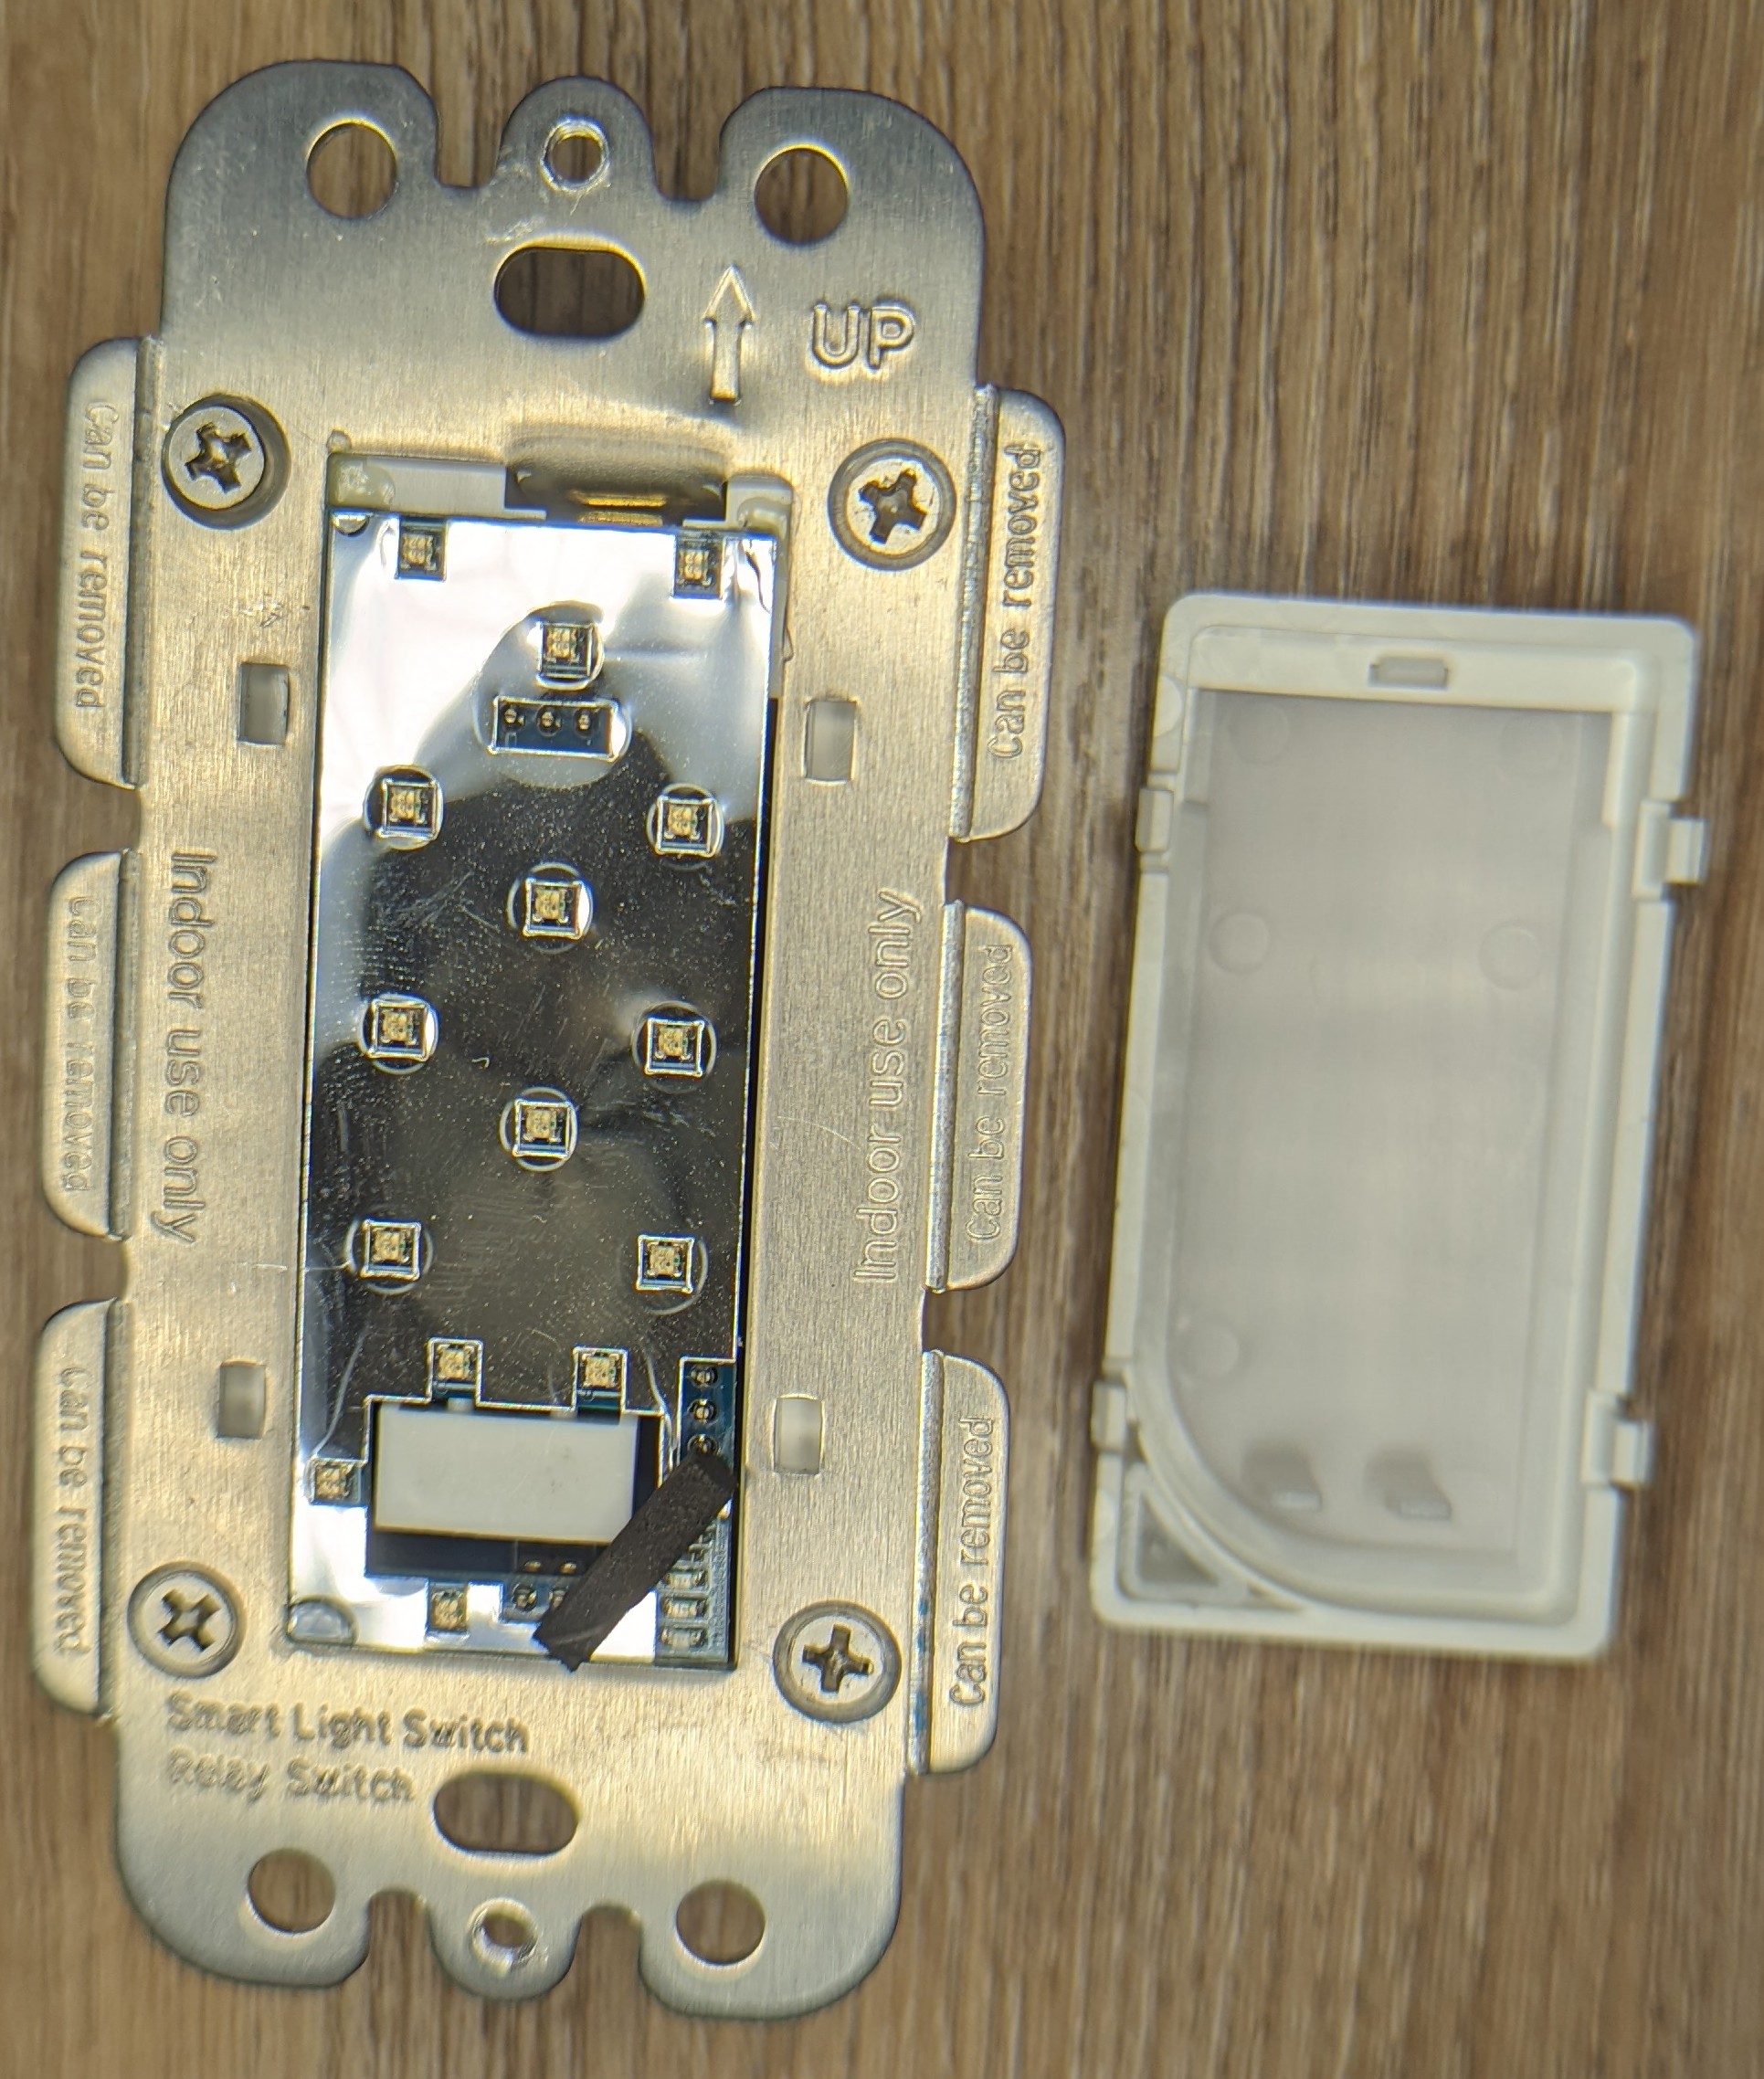 Picture of the switch with no paddle lying next to the paddle. A reflective PCB dotted with RGB leds is visible.